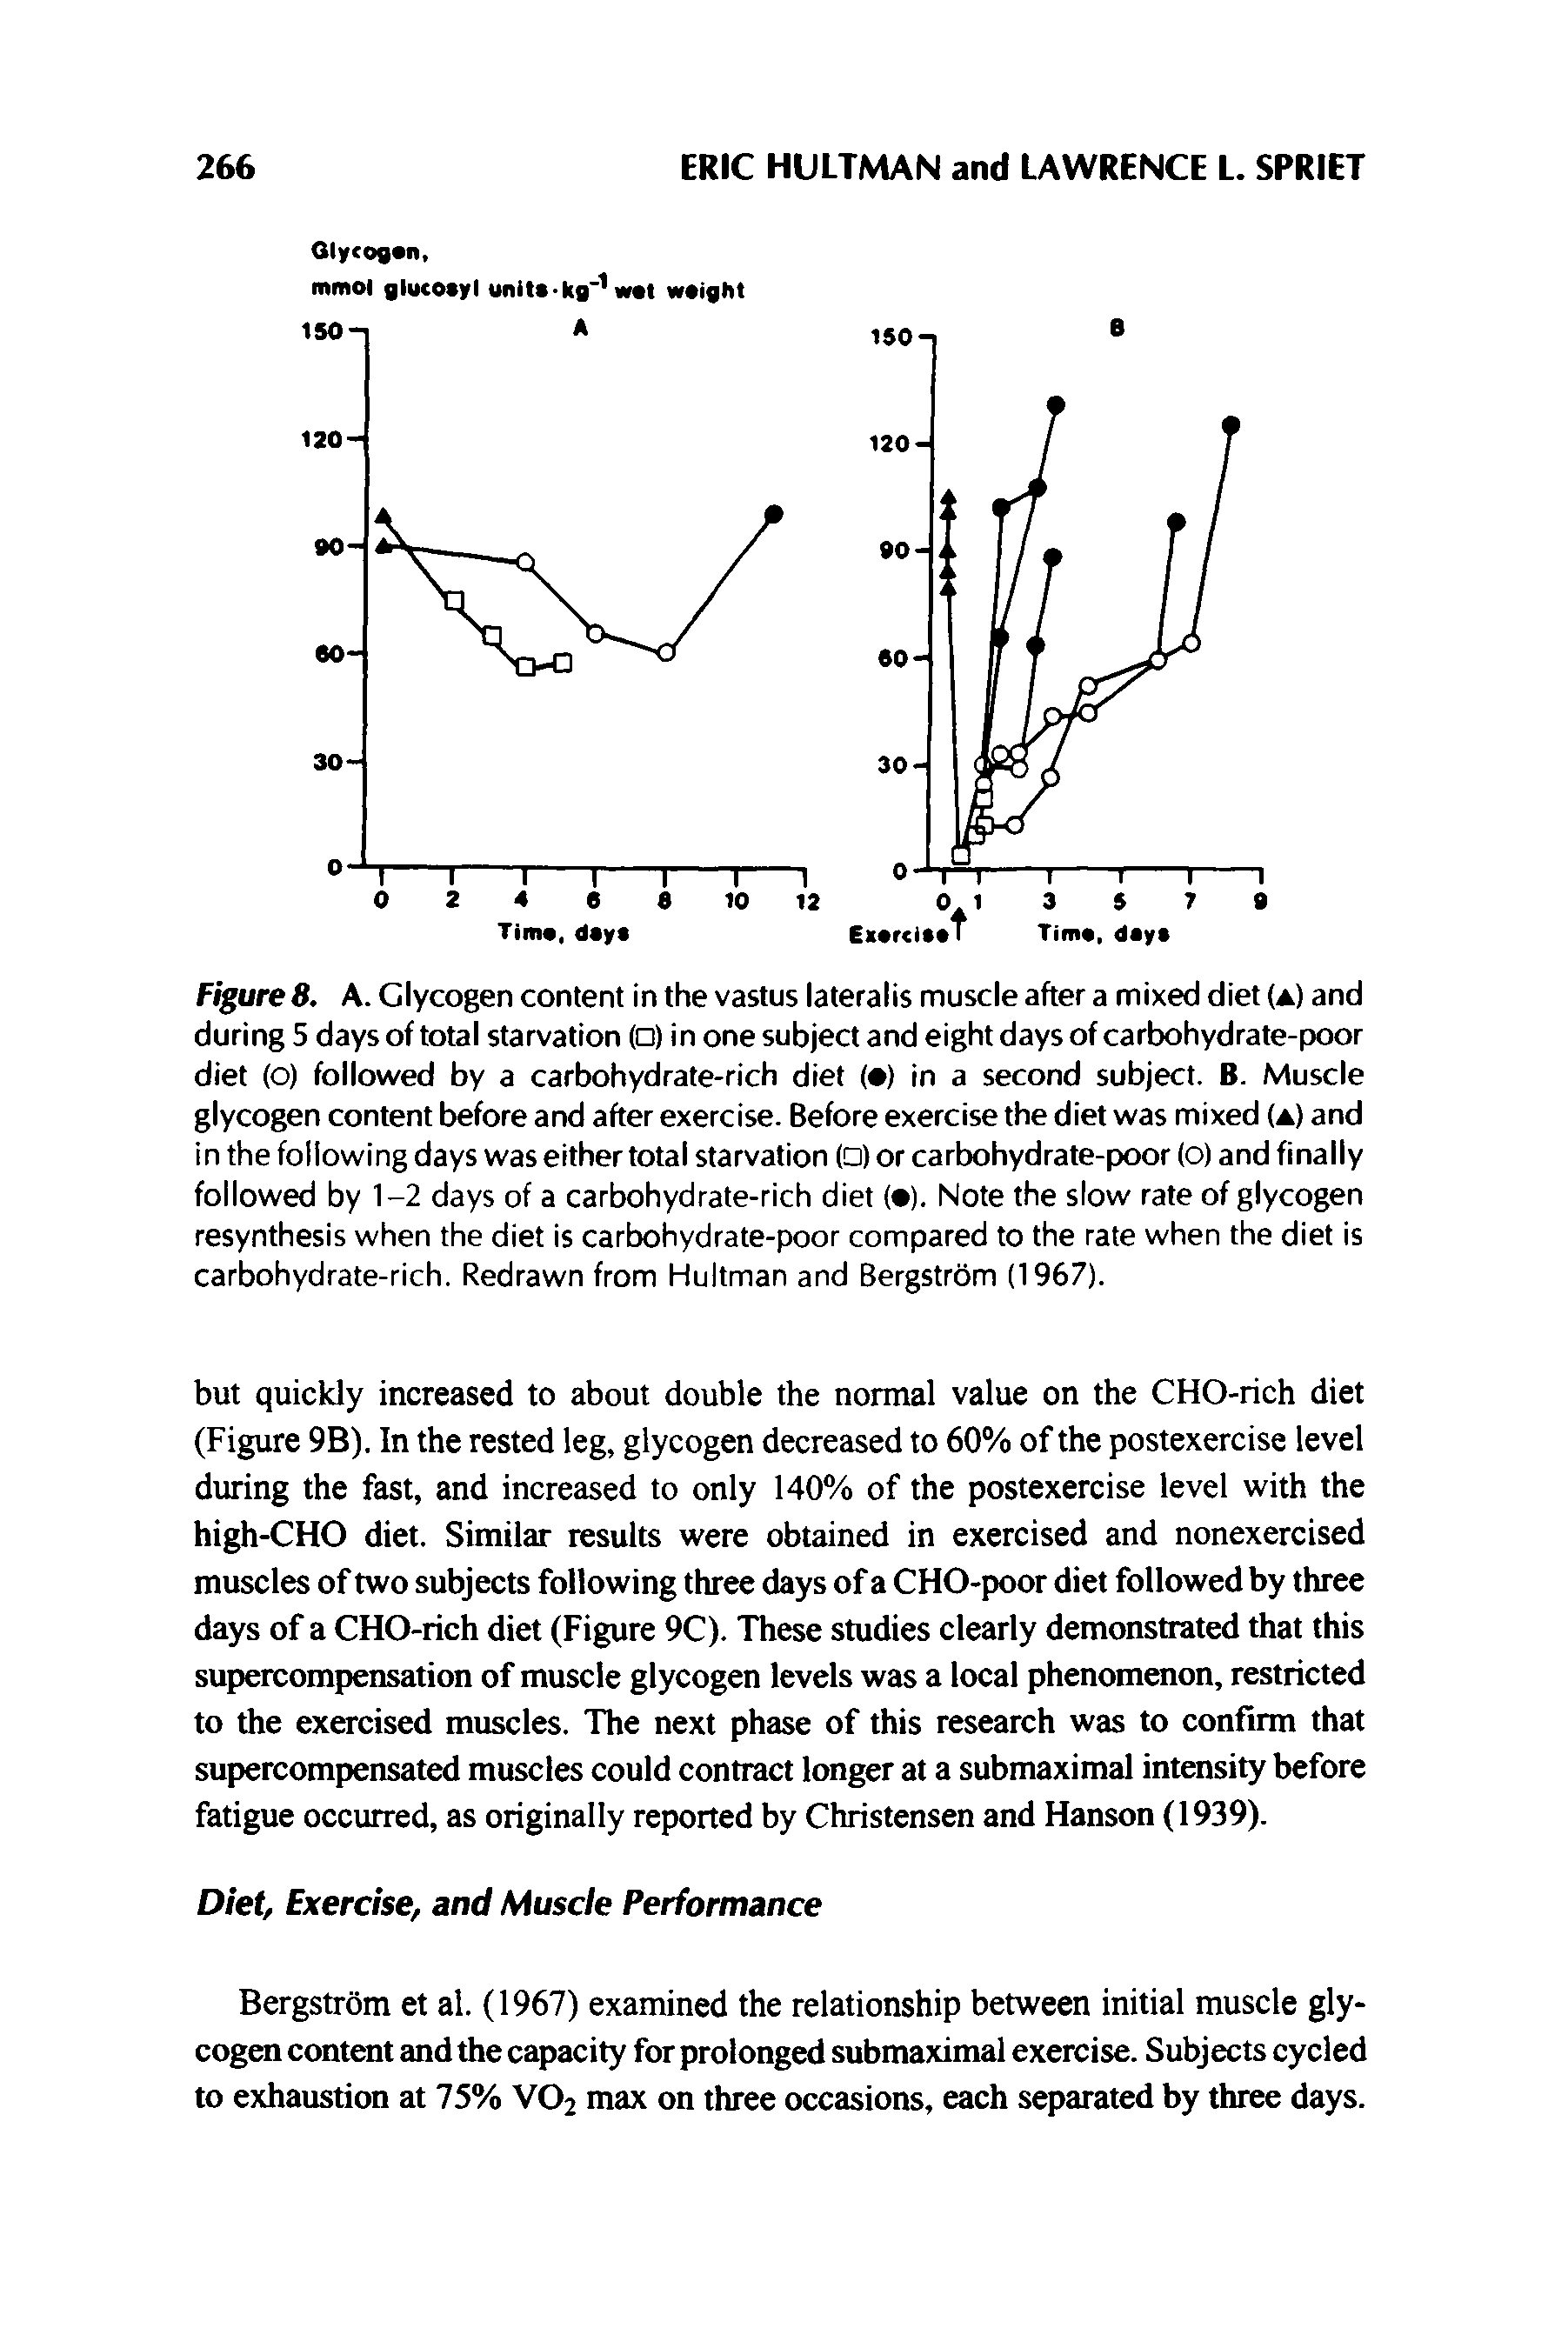 Figure 8. A. Glycogen content in the vastus lateralis muscle after a mixed diet (a) and during 5 days of total starvation ( ) in one subject and eight days of carbohydrate-poor diet (o) followed by a carbohydrate-rich diet ( ) in a second subject. B. Muscle glycogen content before and after exercise. Before exercise the diet was mixed (a) and in the following days was either total starvation ( ) or carbohydrate-poor (o) and finally followed by 1-2 days of a carbohydrate-rich diet ( ). Note the slow rate of glycogen resynthesis when the diet is carbohydrate-poor compared to the rate when the diet is carbohydrate-rich. Redrawn from Hultman and Bergstrom (1967).